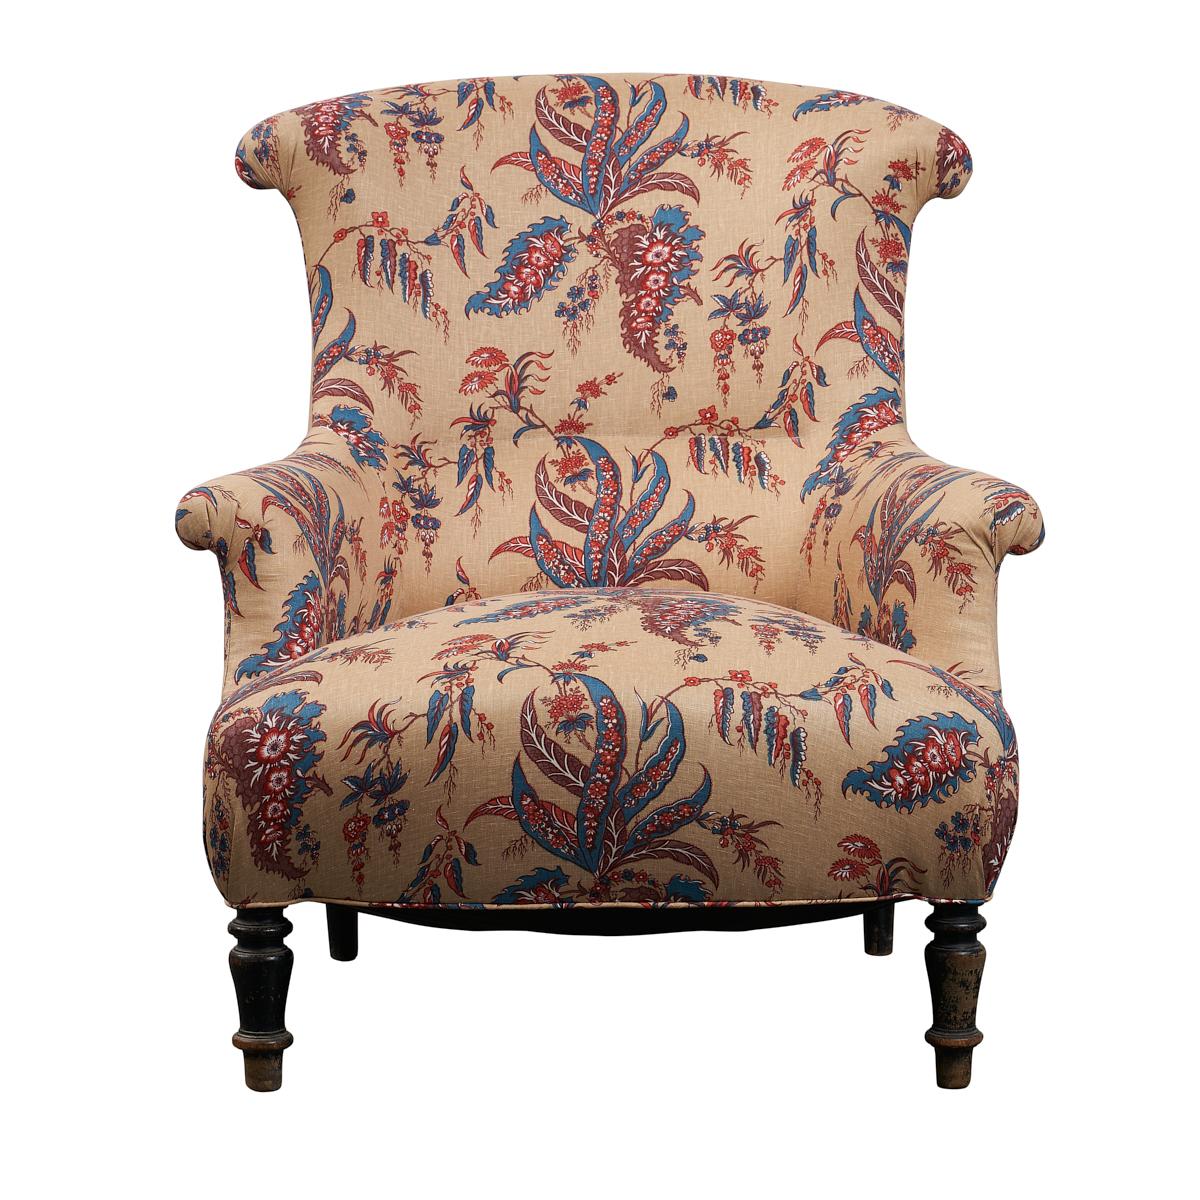 We love the elegant silhouette of this pair of late 19th-century chairs, discovered in the South of France and newly upholstered Apolline Botanical fabric. With high curved backs that are perfectly pitched and scrolled arms, these gorgeous chairs